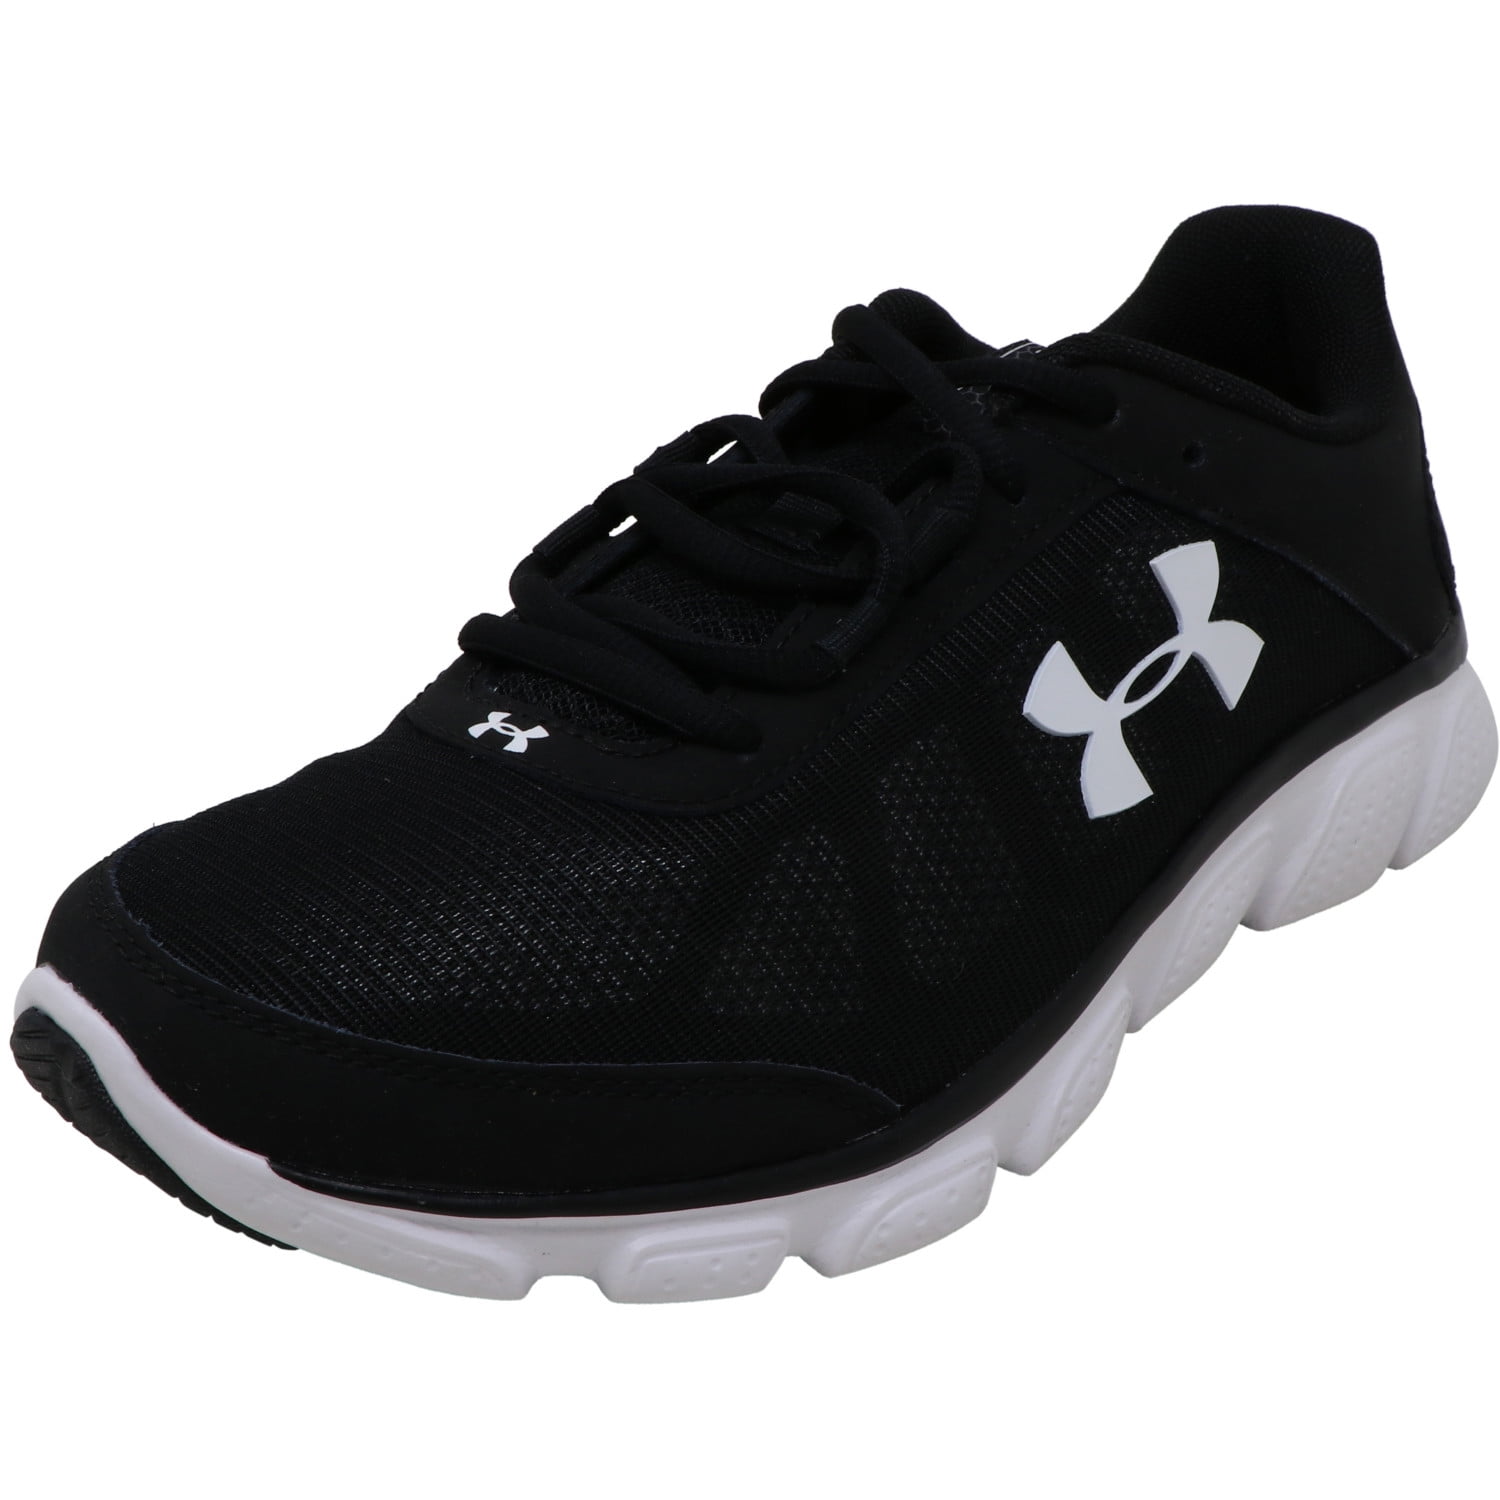 Under Armour - Under Armour Women's Micro G Assert Black / White Ankle ...